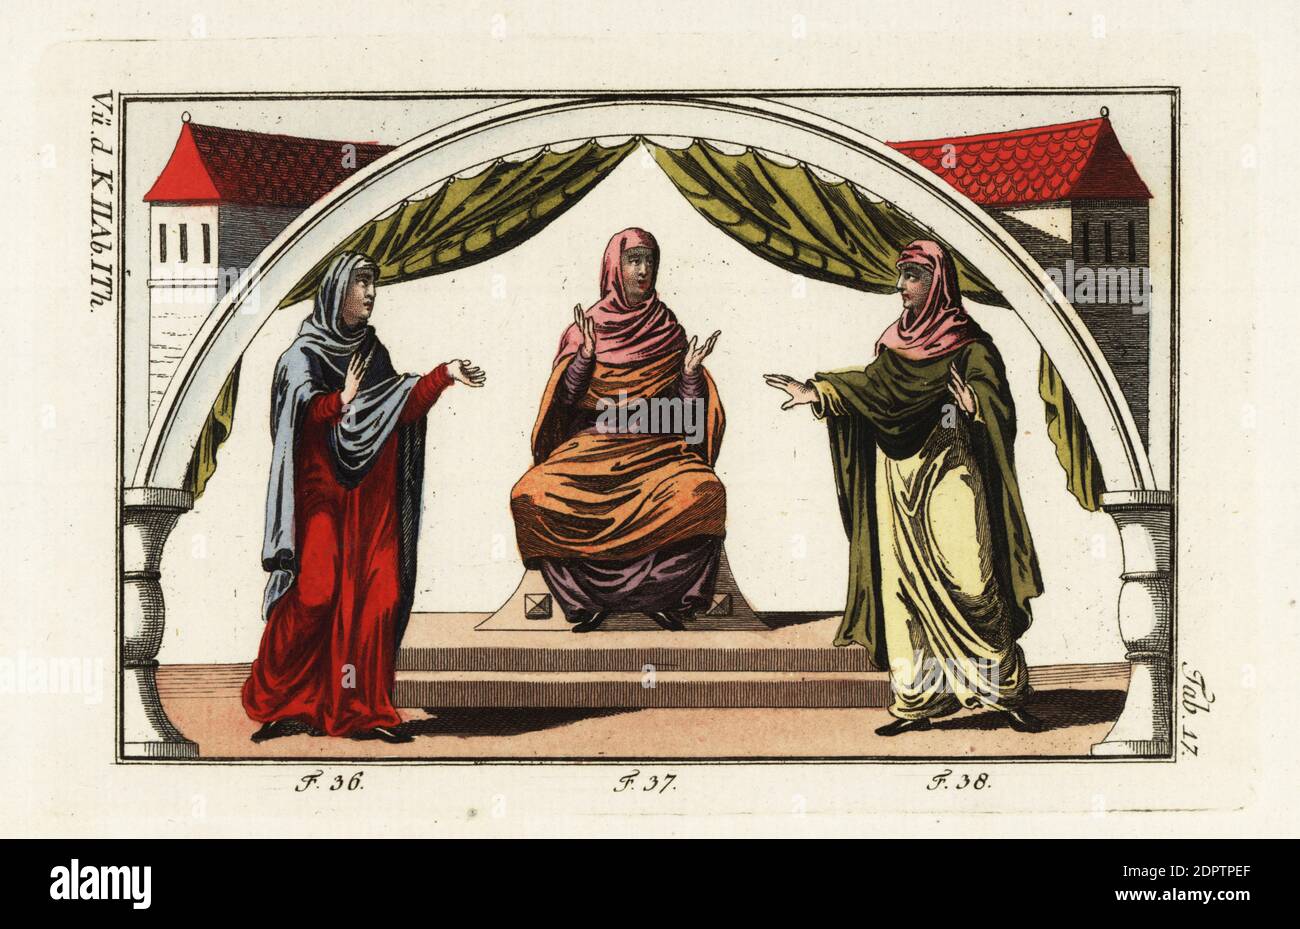 Anglo Saxon woman wearing a tunic, veil, mantle, and open-toe shoes 36, woman in tunic and veil 37 and woman in a veil in a different colour from her mantle 38. Handcolored copperplate engraving from Robert von Spalart's Historical Picture of the Costumes of the Principal People of Antiquity and Middle Ages, Vienna, 1796. Stock Photo